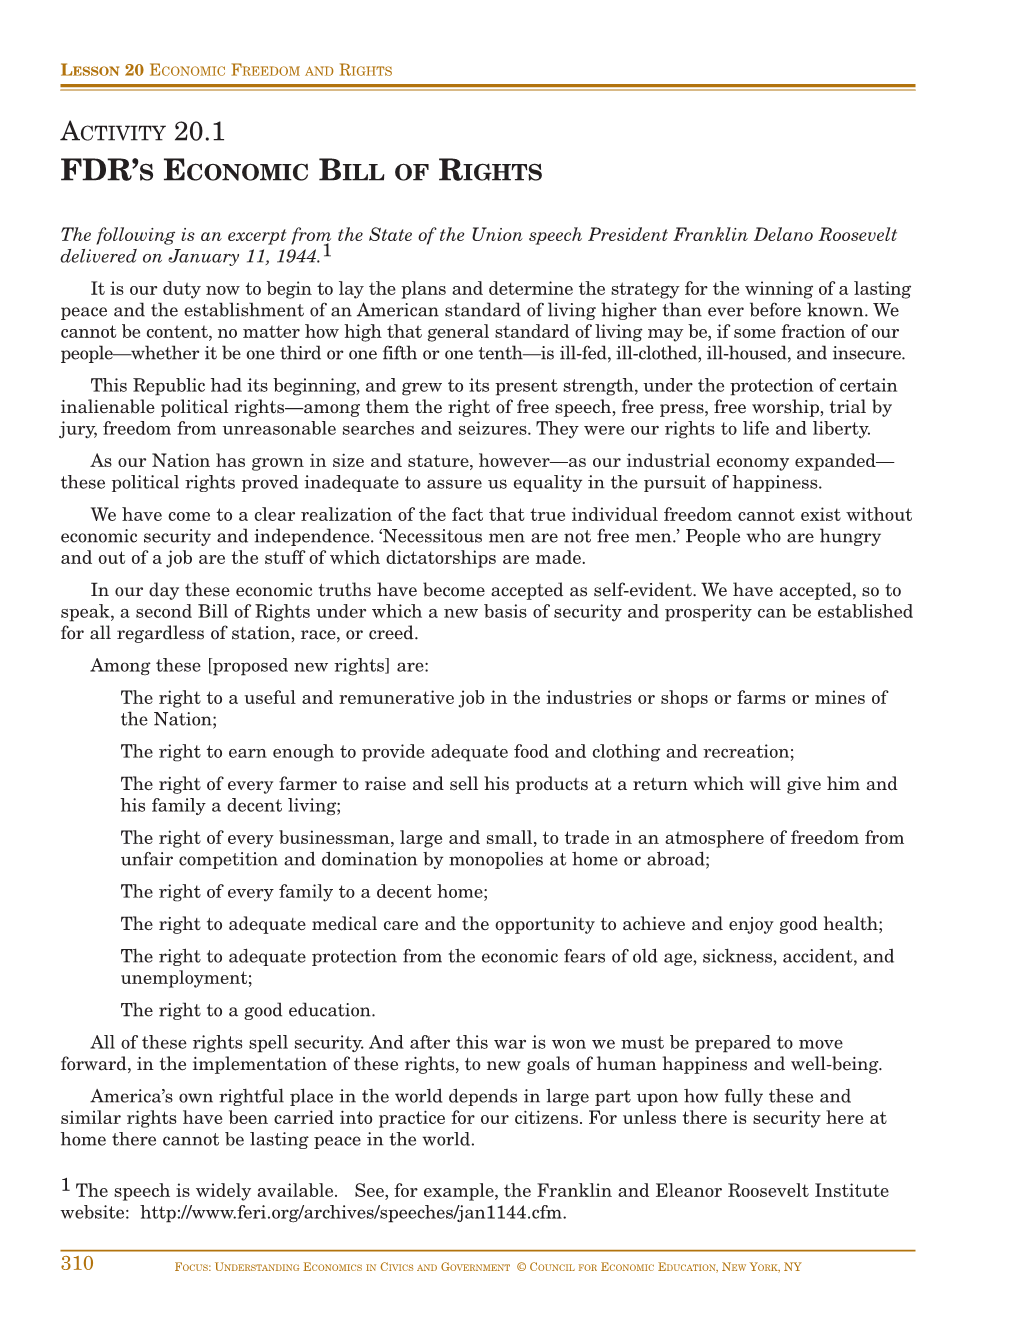 Fdr's Economic Bill of Rights